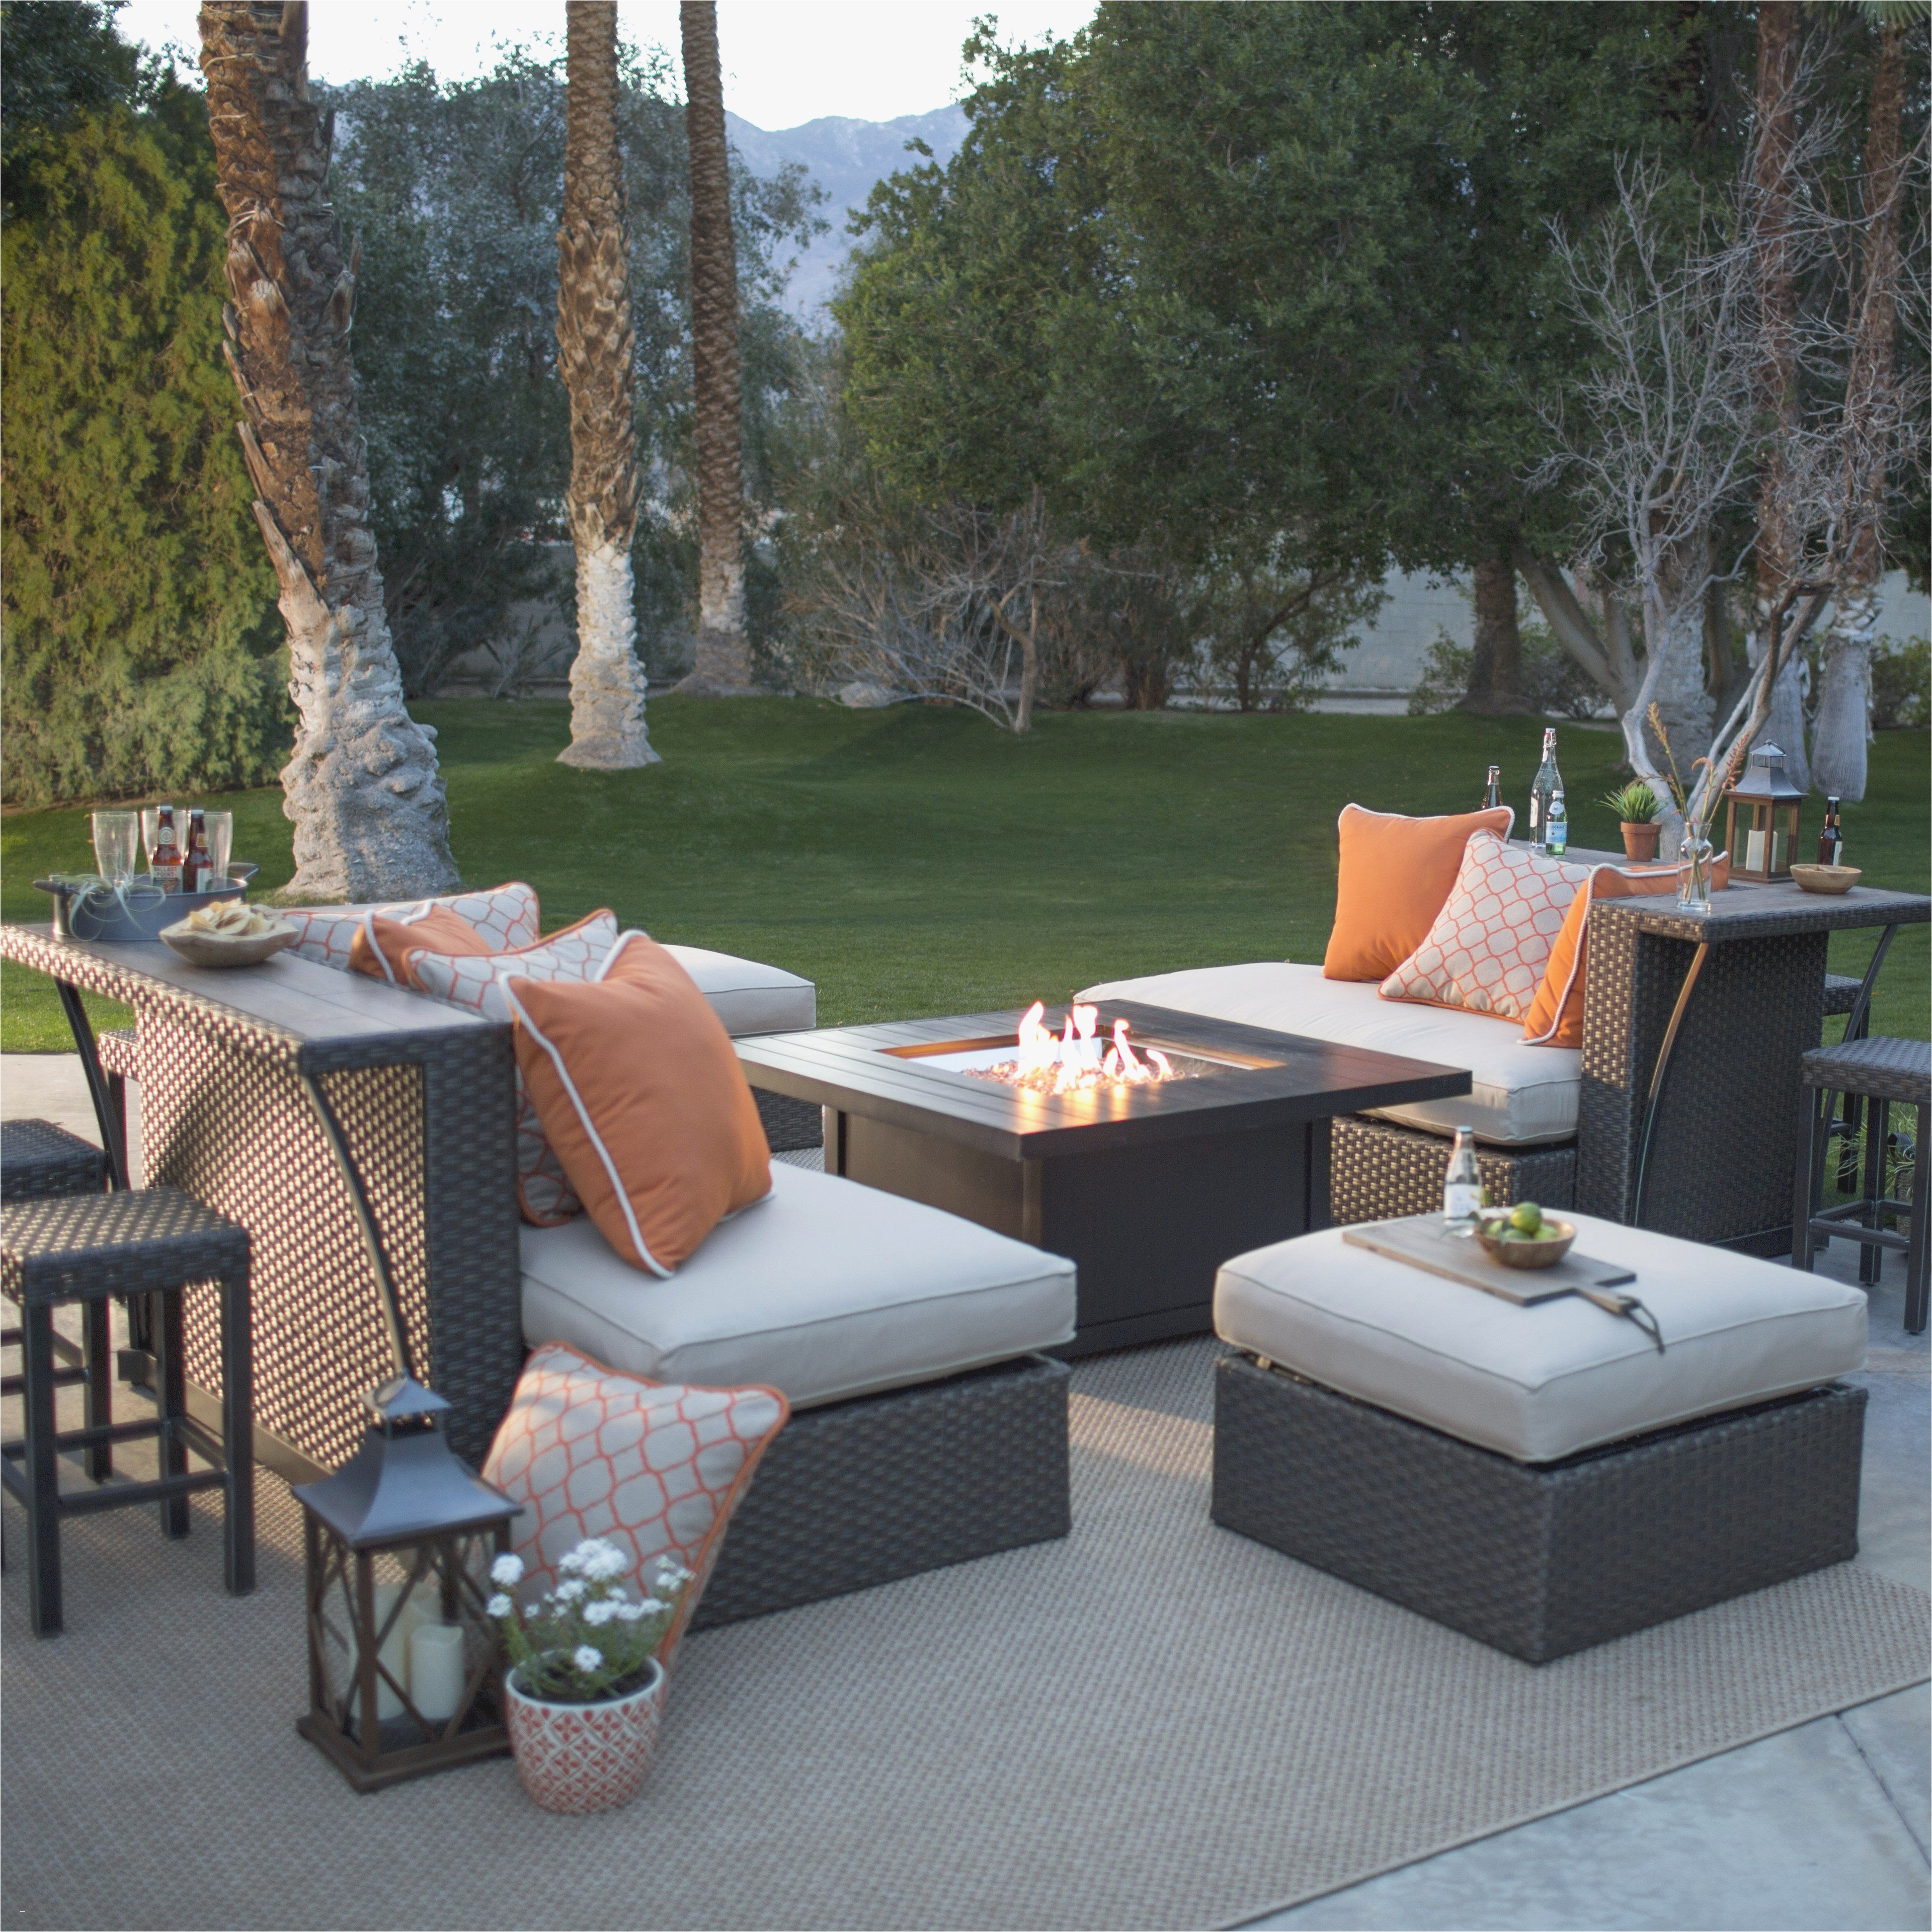 Wilson Fisher Patio Furniture Wilson and Fisher Patio Furniture